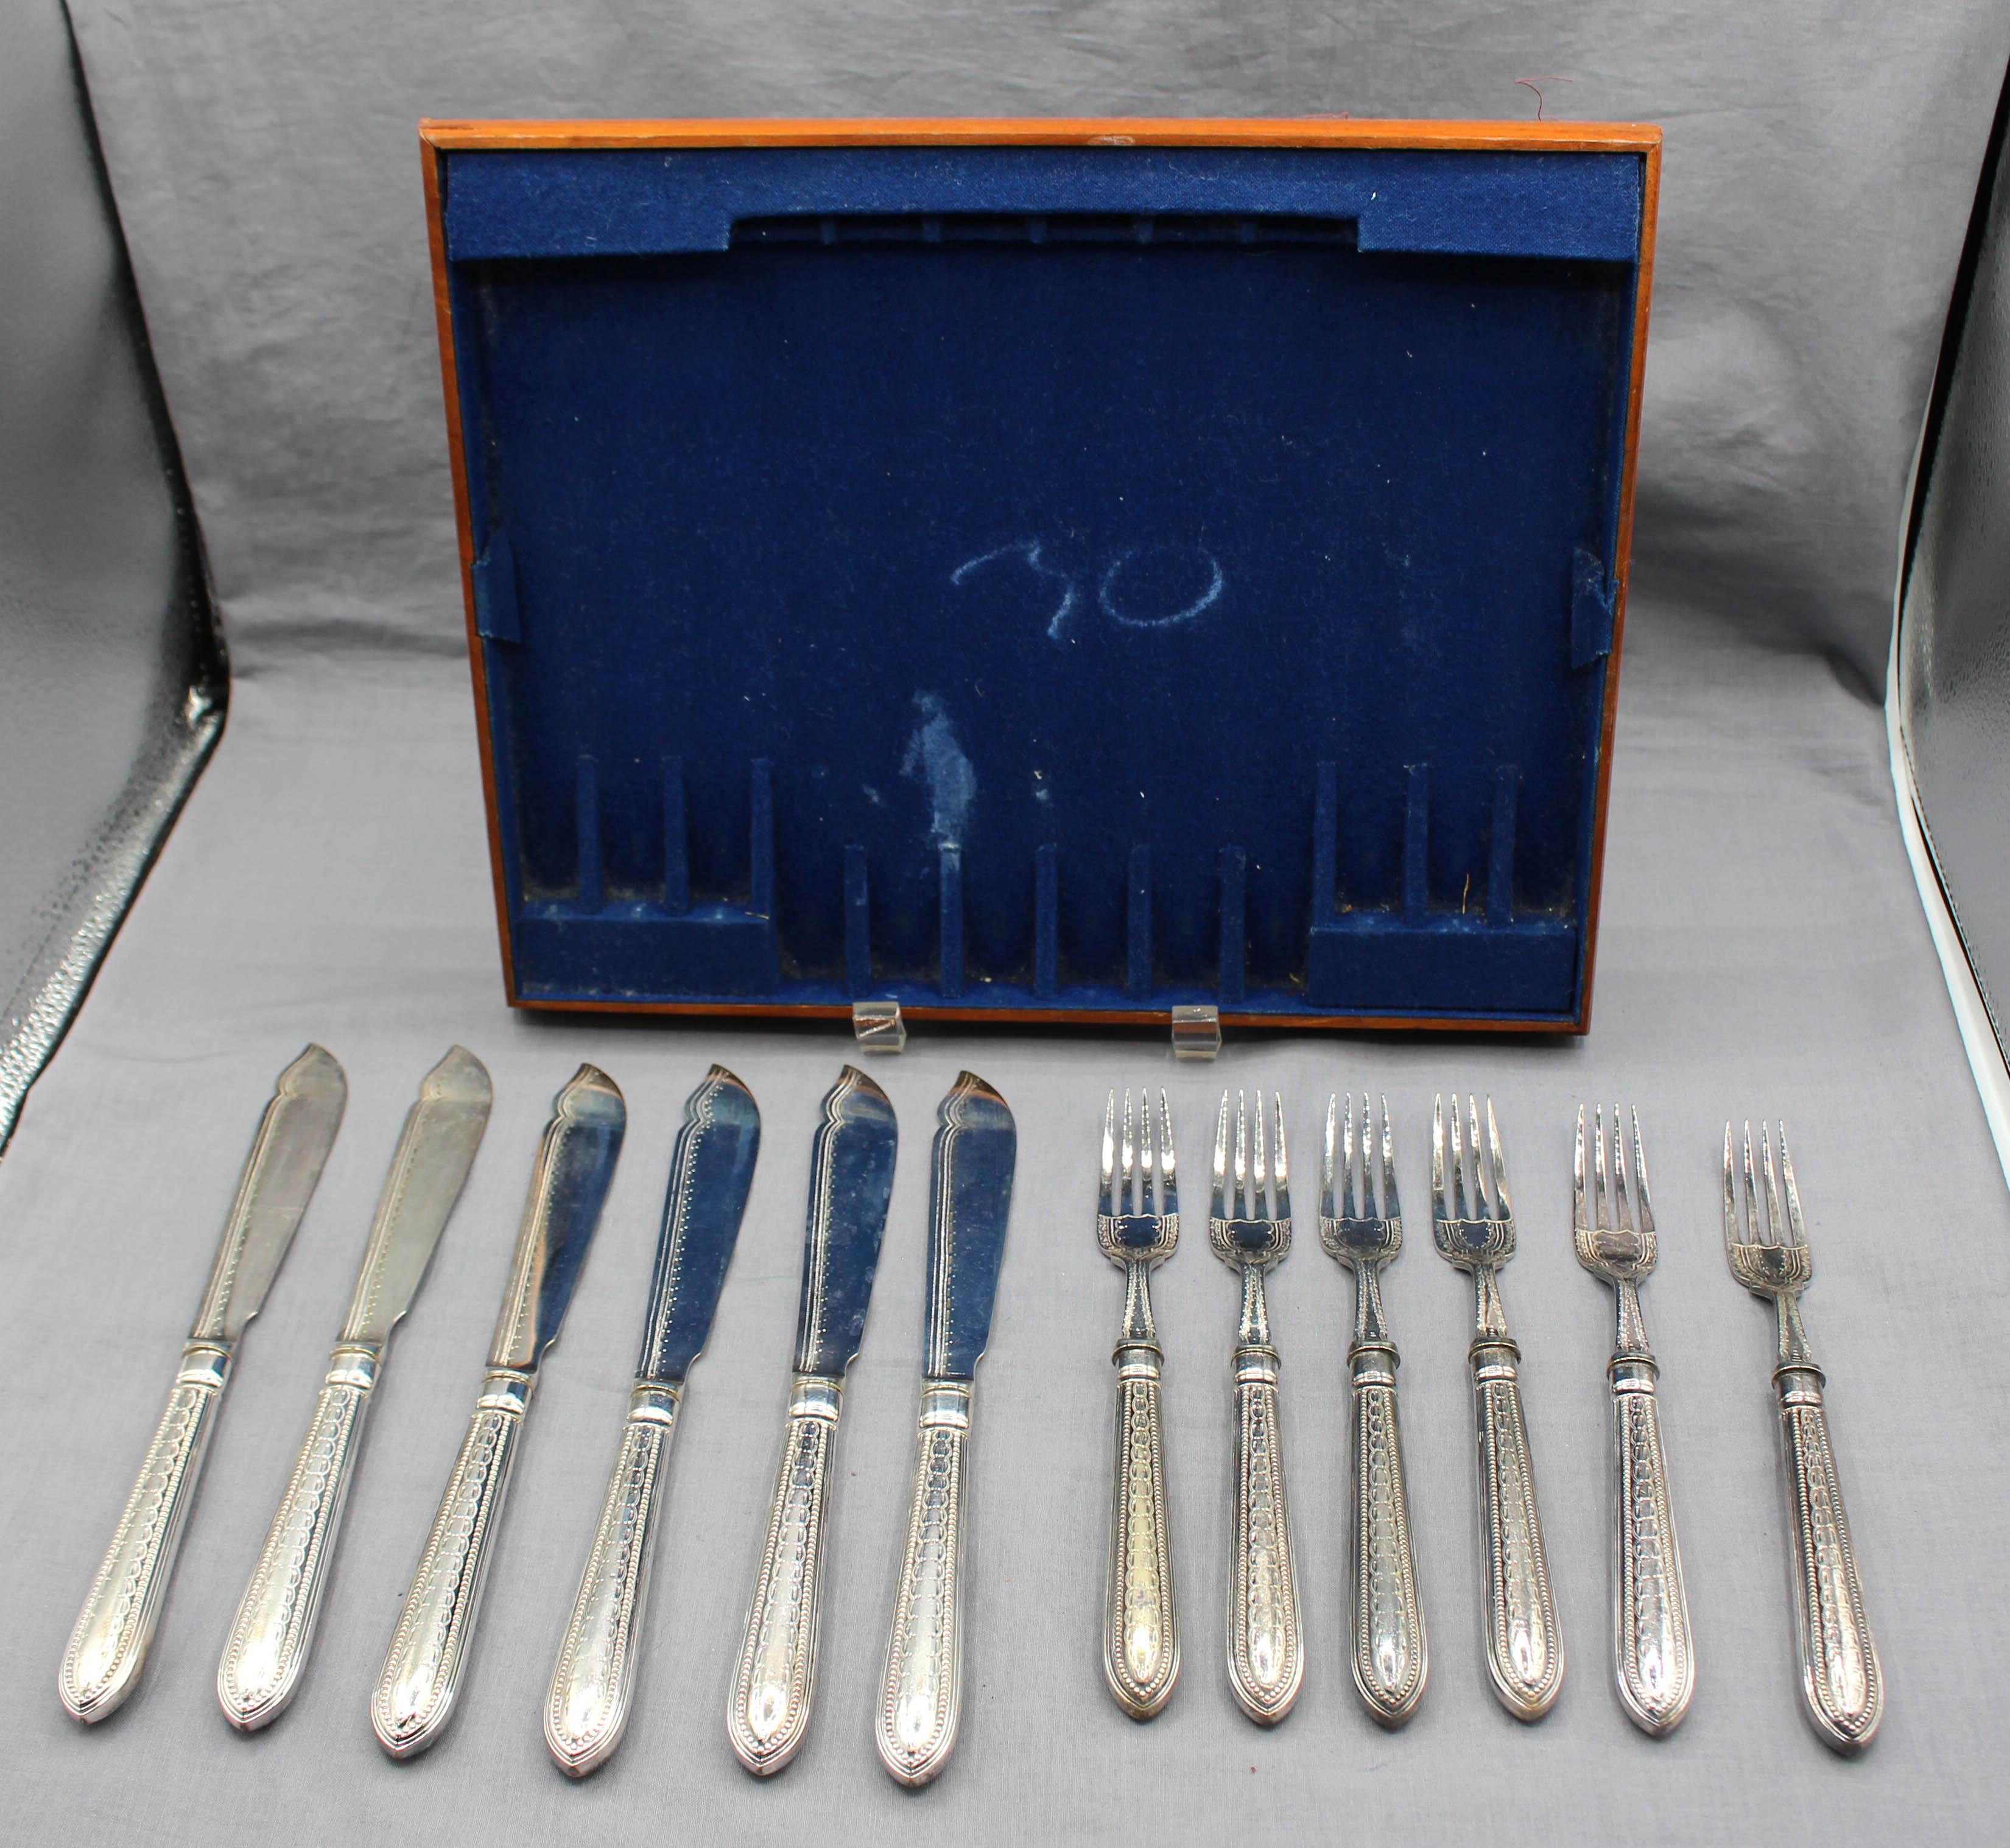 A circa 1880s set of fish knives & forks for 6, English. Silverplate made by William Hutton & Sons, Sheffield. Aesthetic taste. Fine condition.
Knife: 9.5